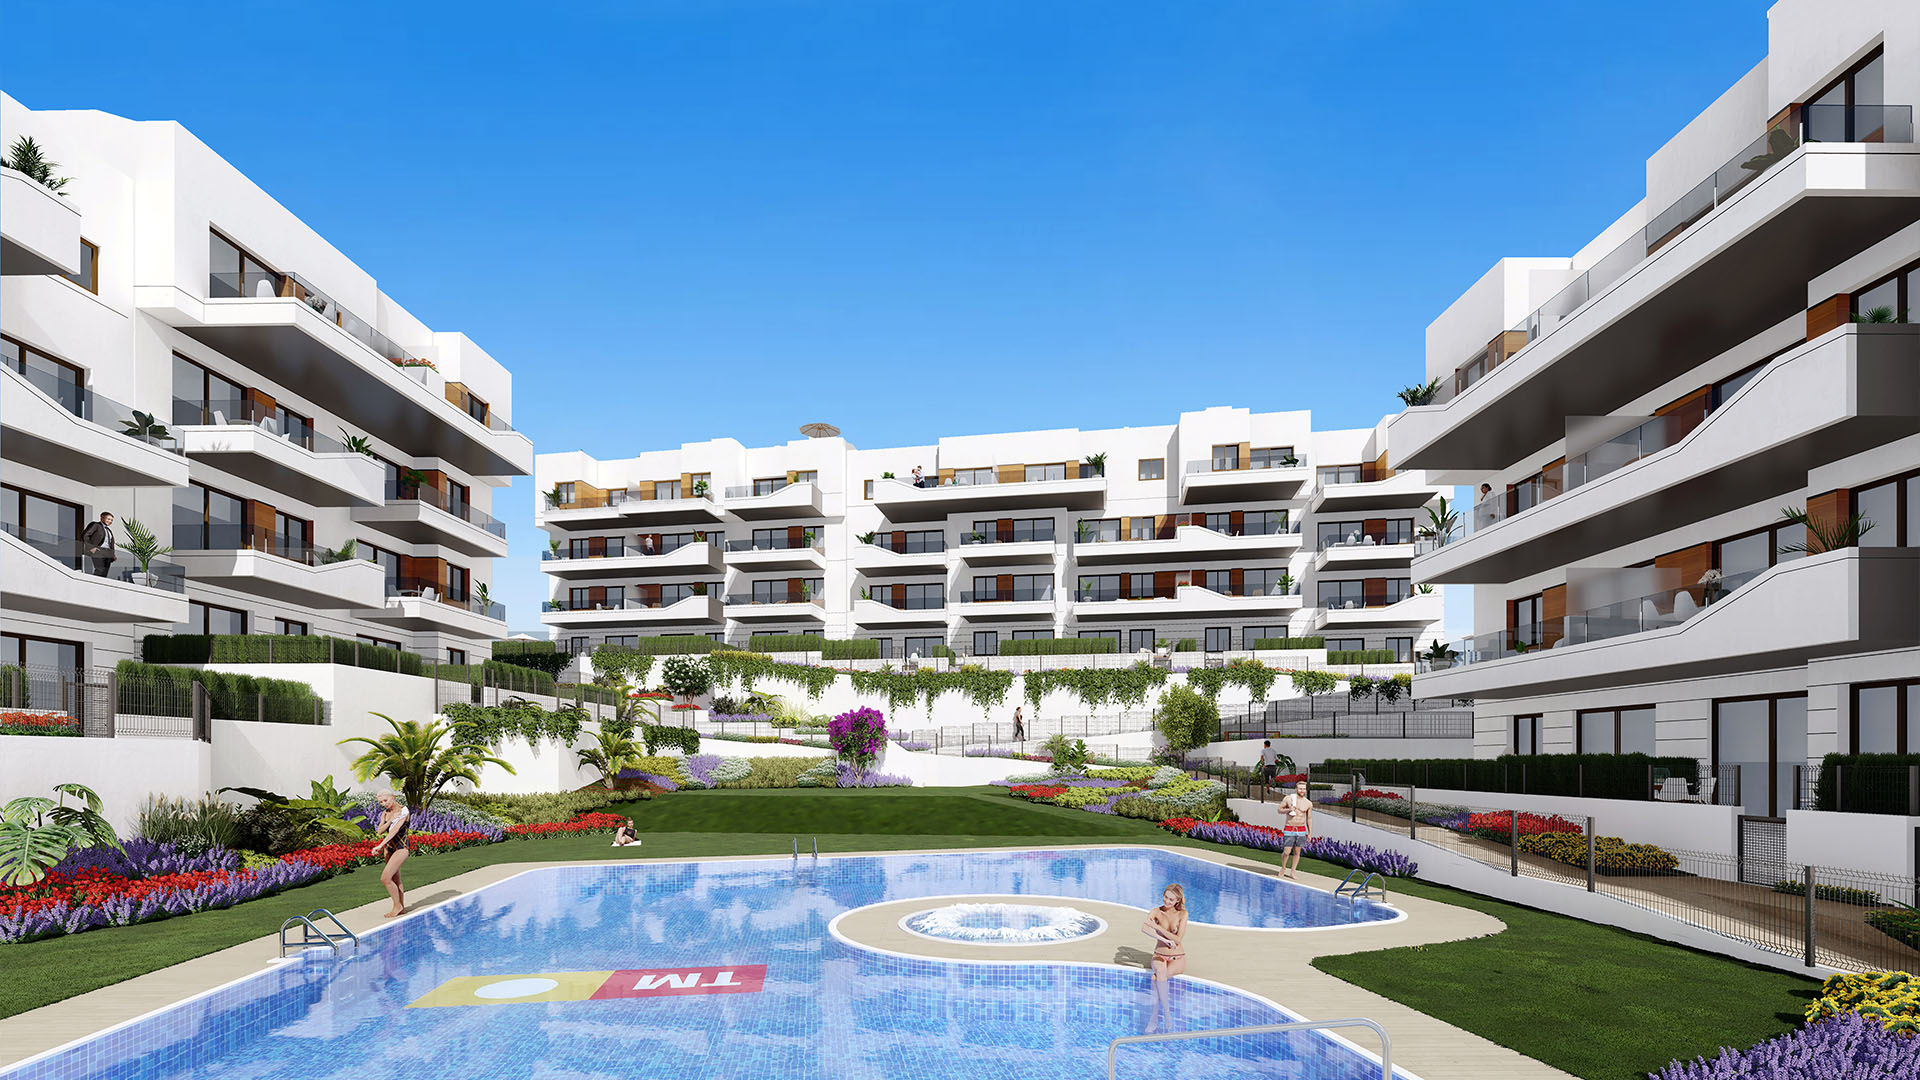 Apartment in Beach apartments in Villamartin with 2 or 3 bedrooms and community pools and large common areas 